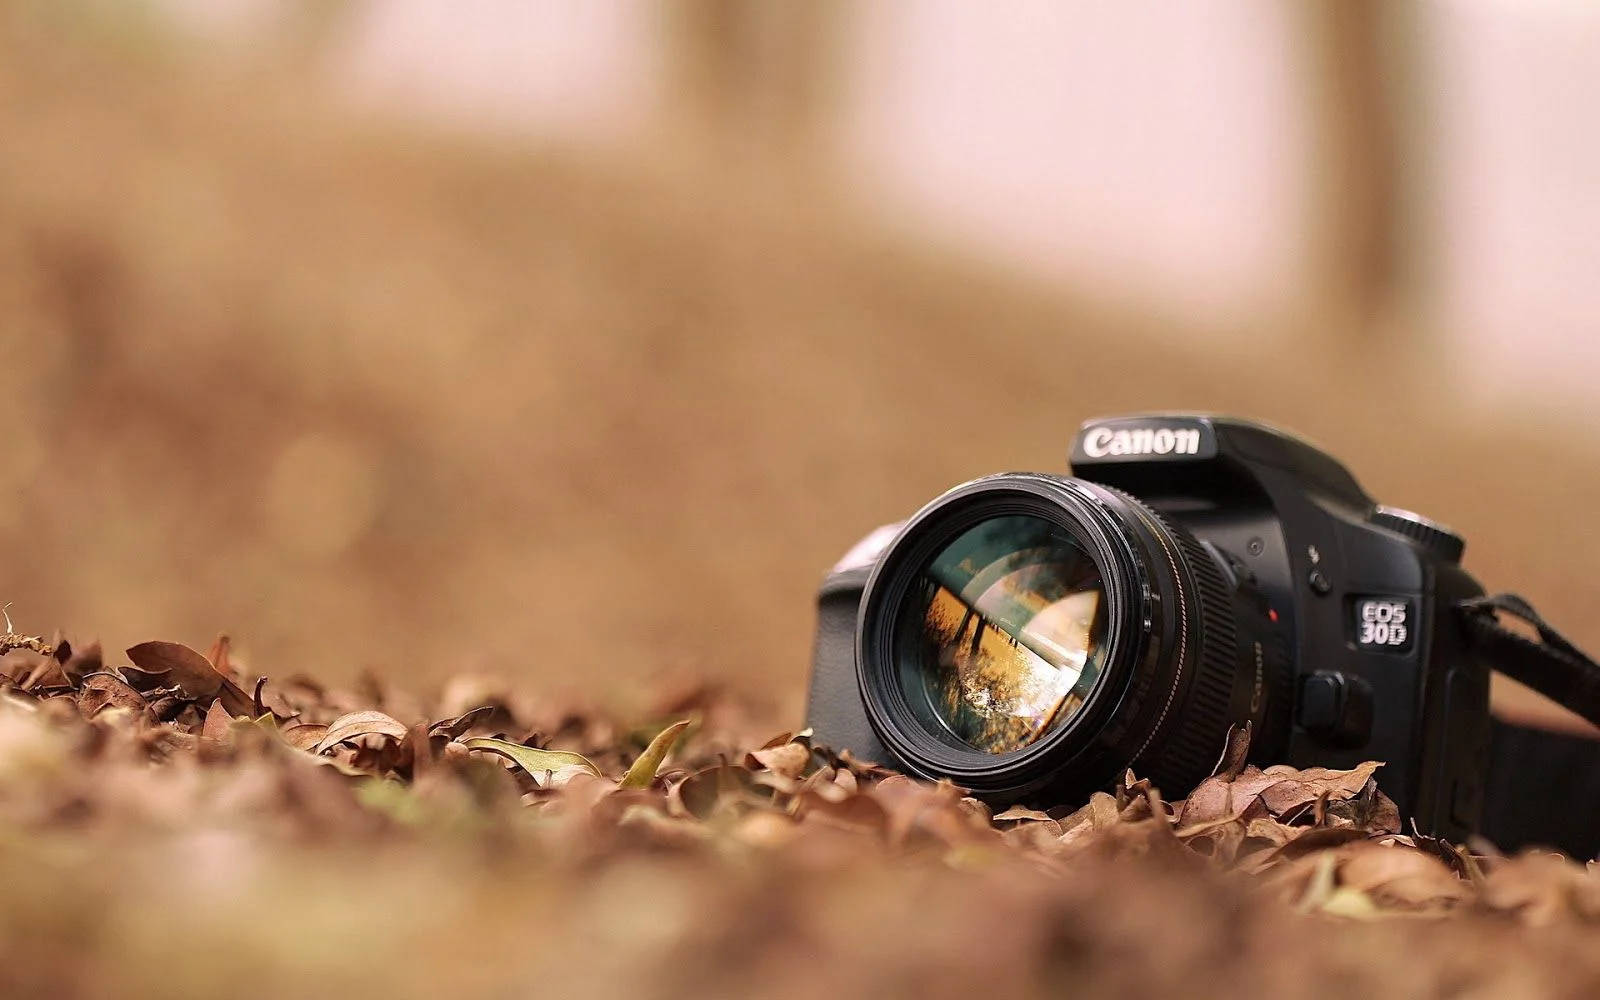 Hd Photography Of Camera By The Fallen Leaves Background